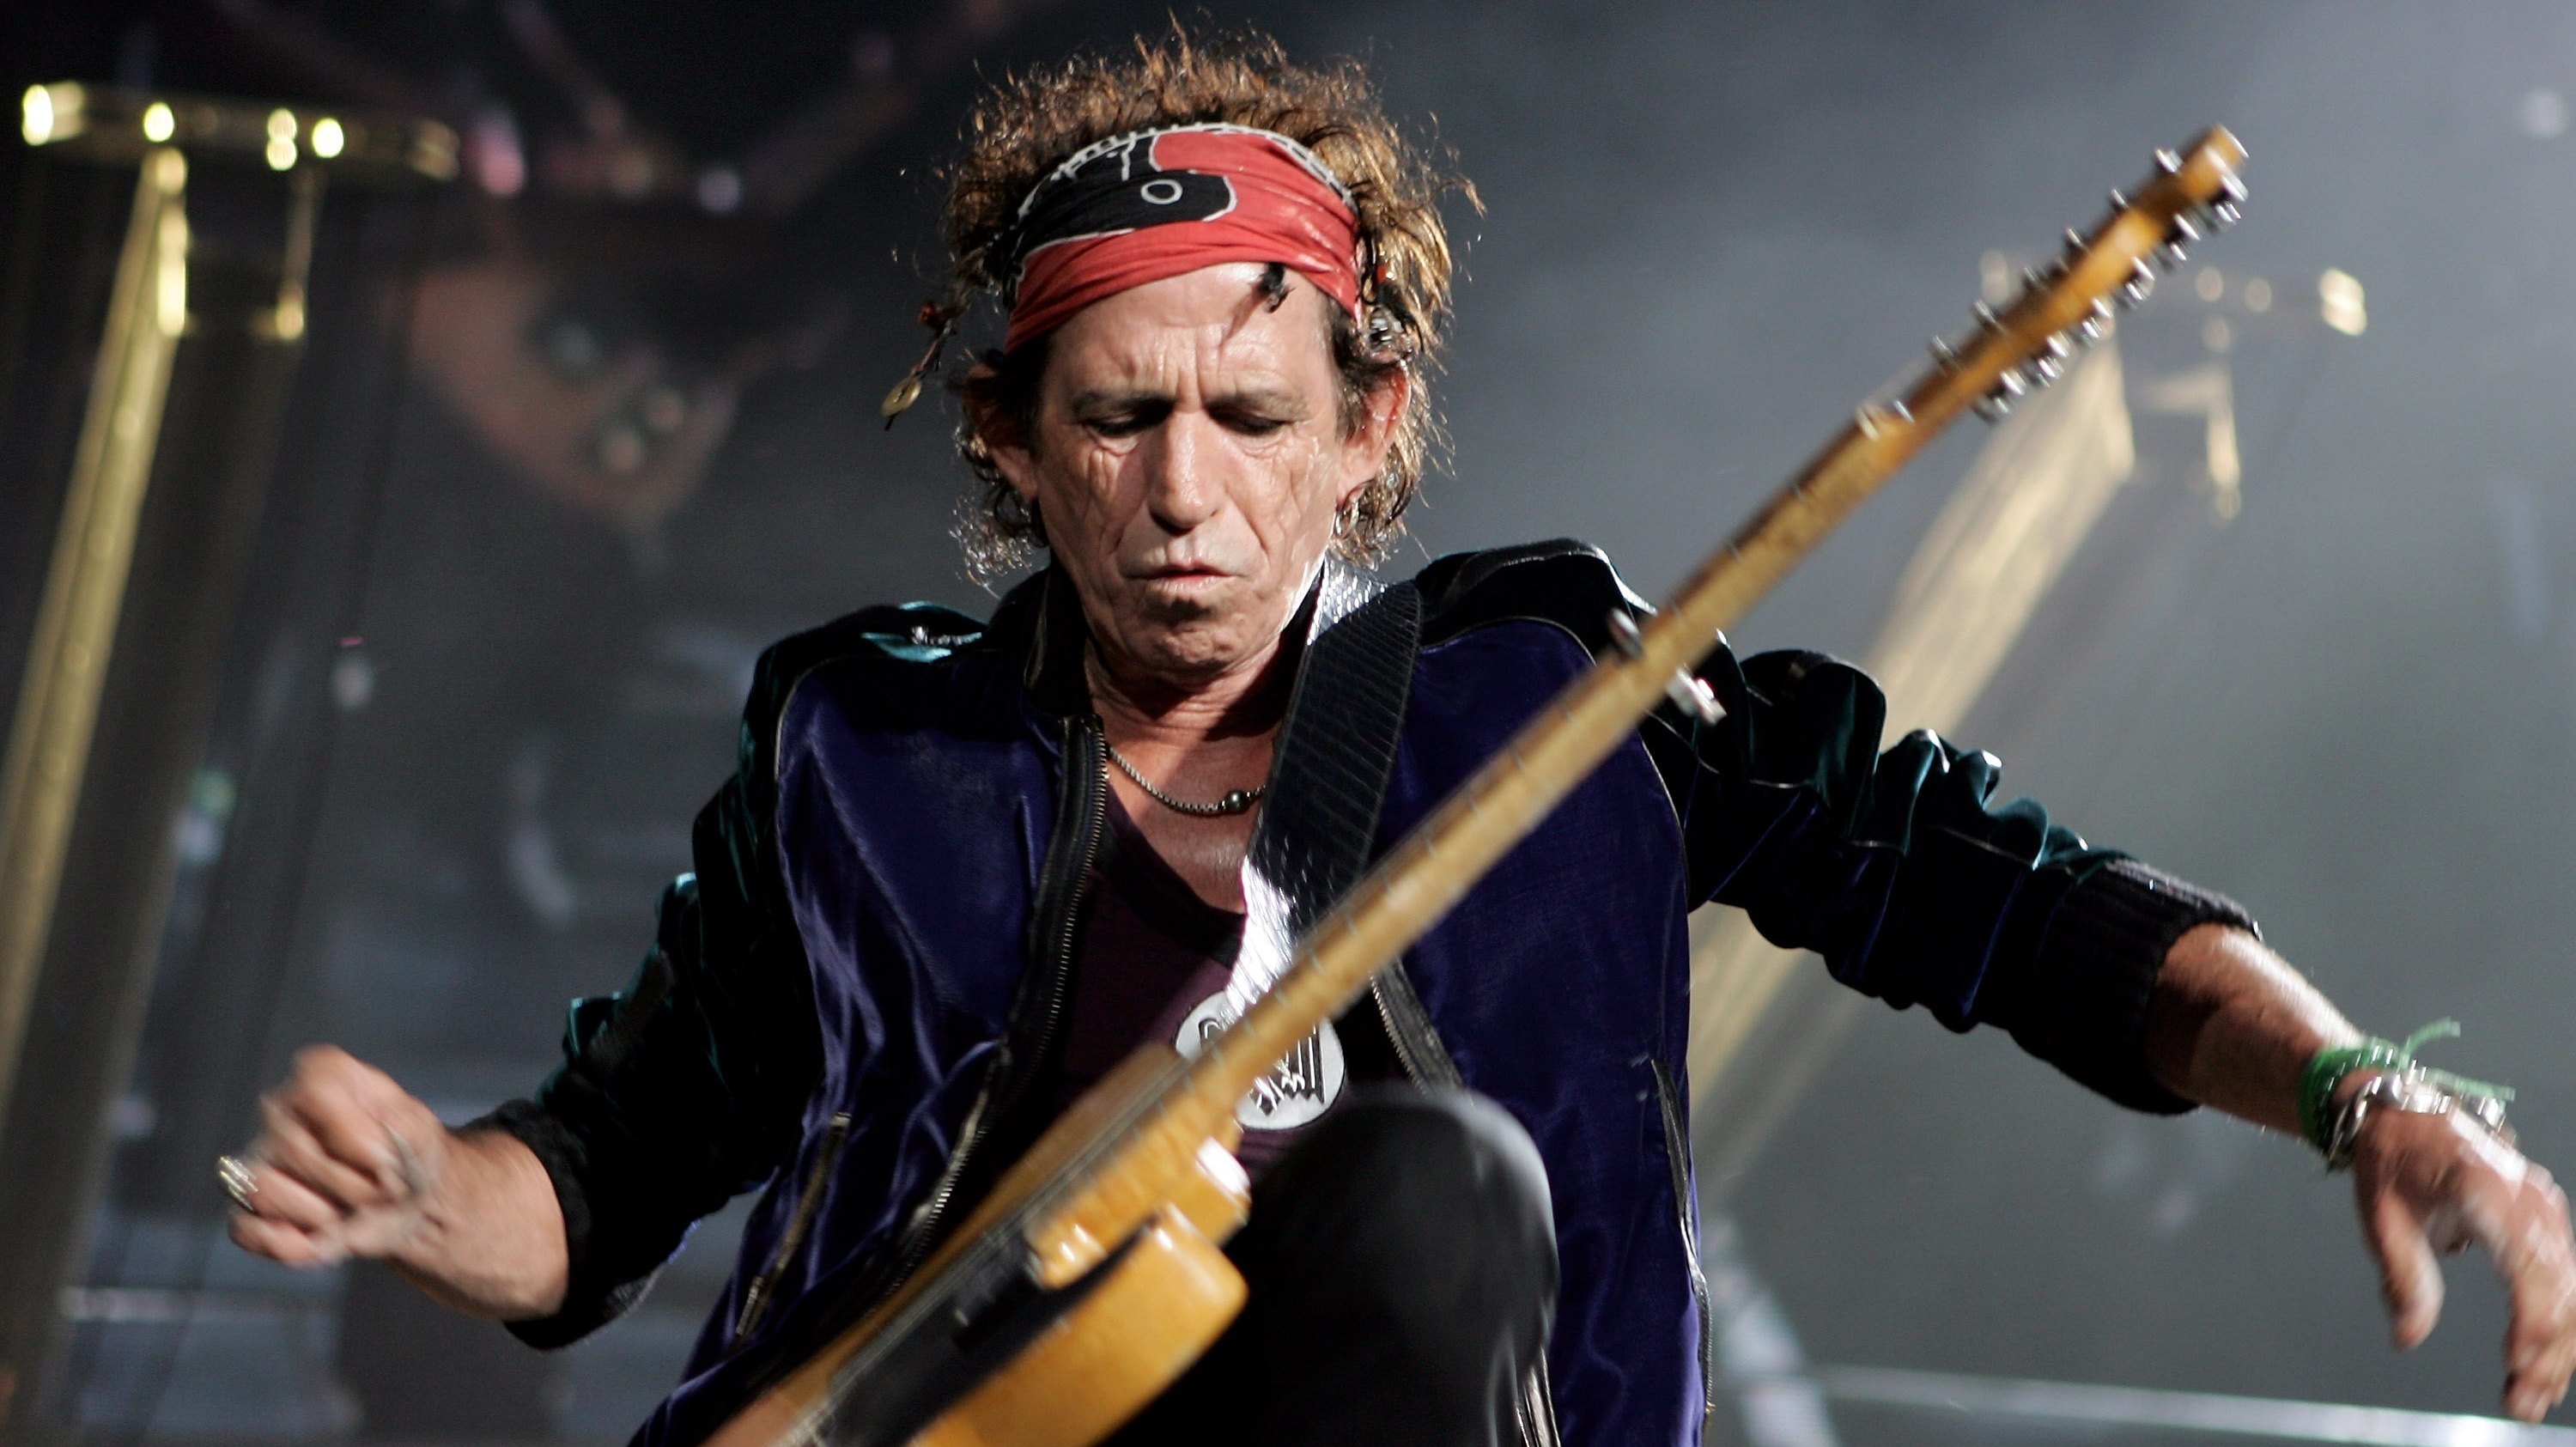 Guitarist and songwriter Keith Richards calls "Street Fighting Man" one of his favorite Rolling Stones songs.